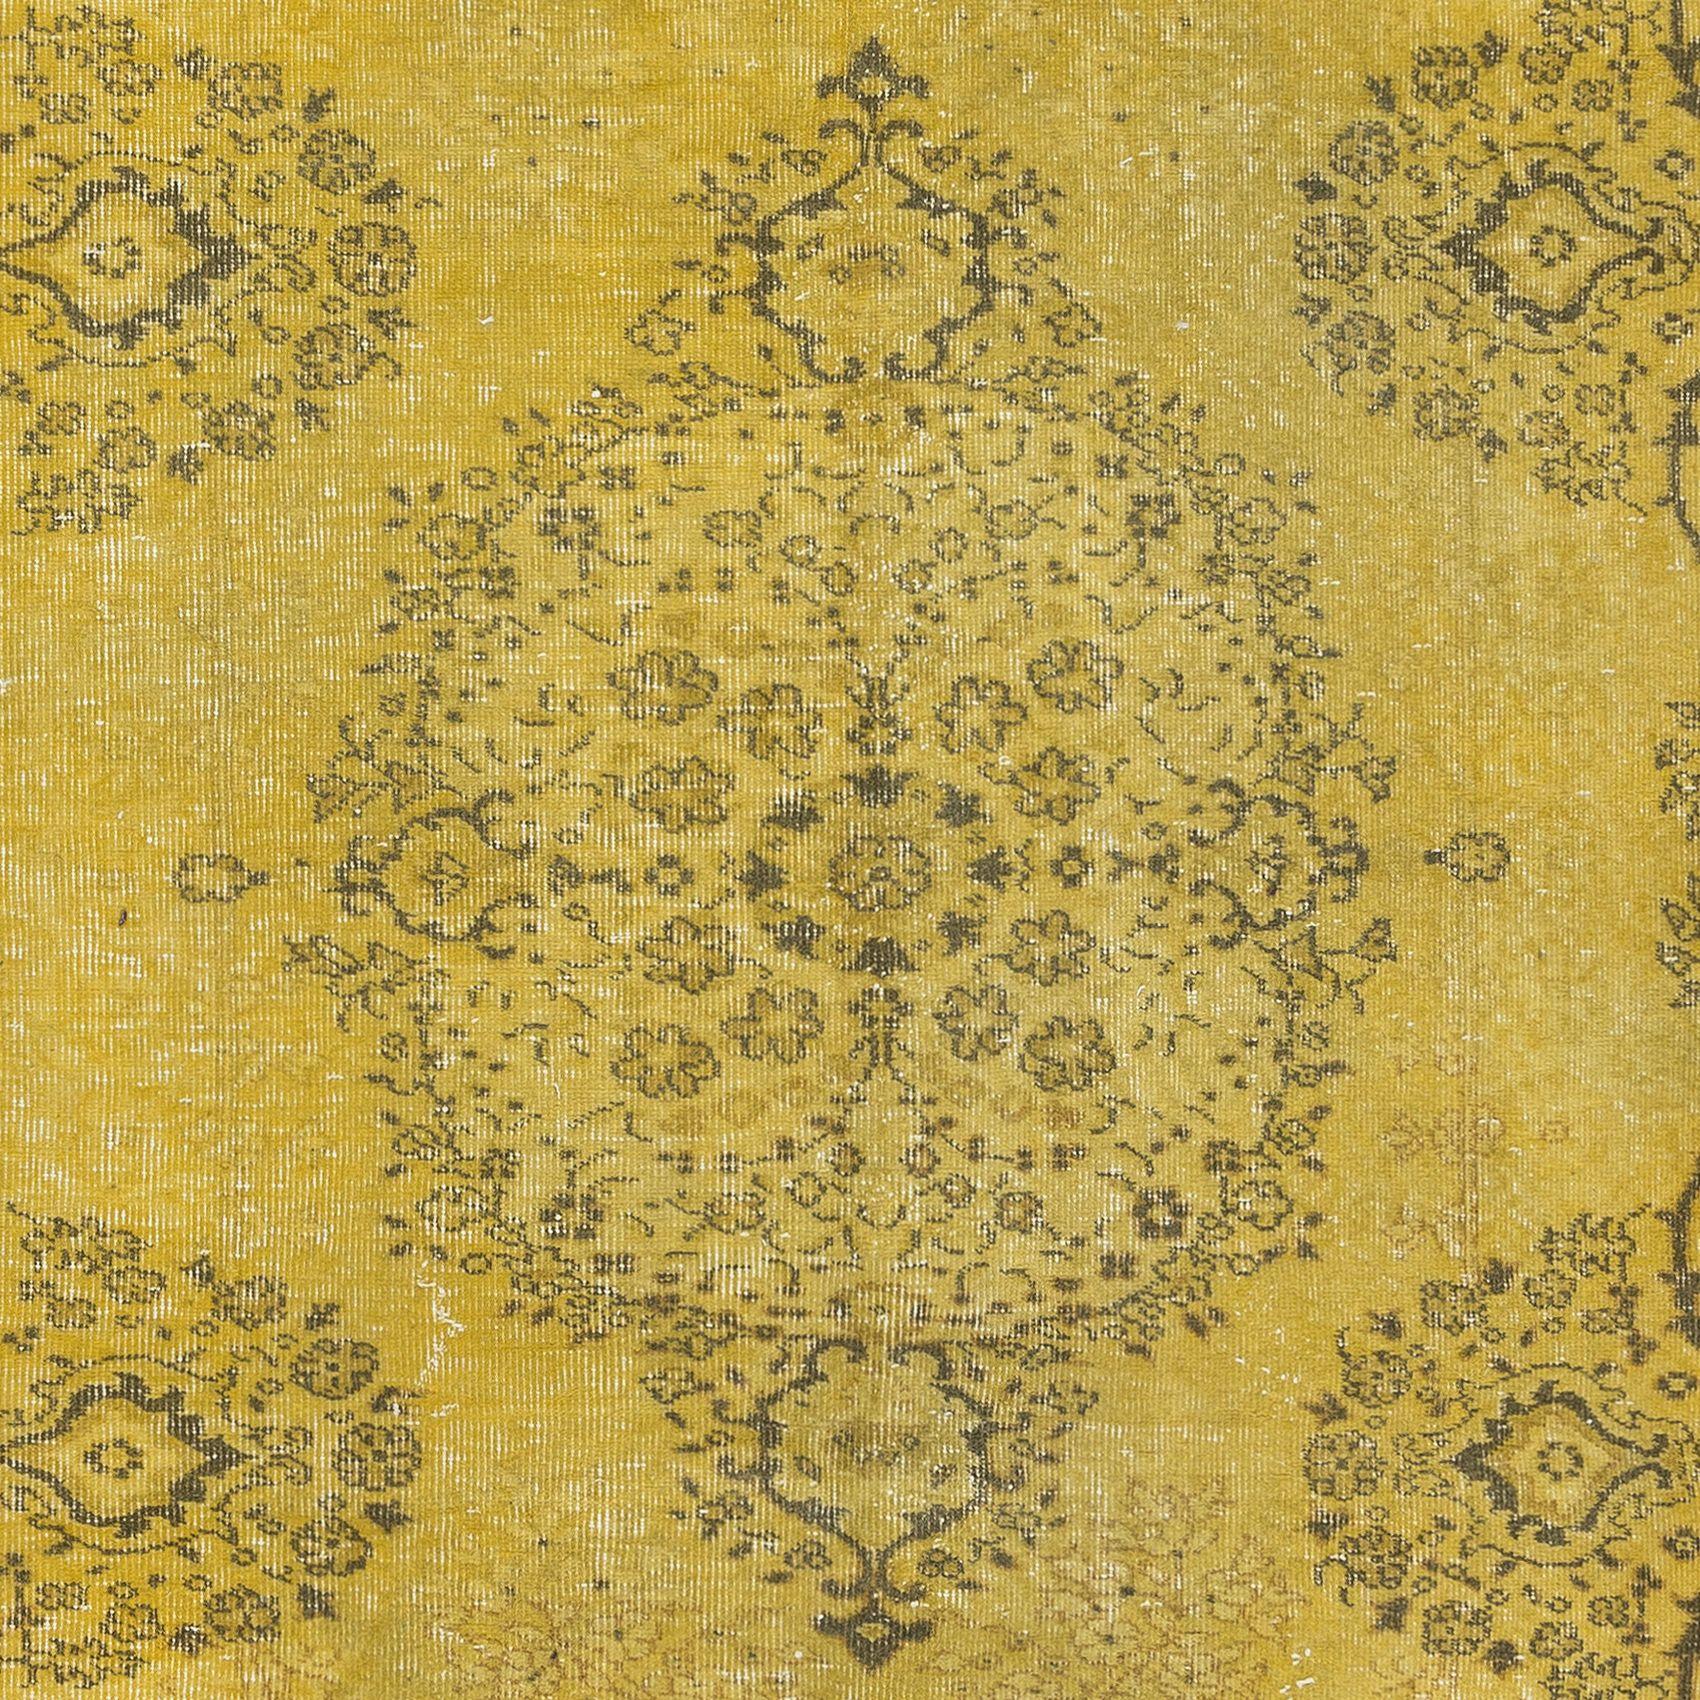 5.5x8 Ft Upcycled Handmade Turkish Area Rug, Contemporary Yellow OverDyed Carpet In Good Condition For Sale In Philadelphia, PA